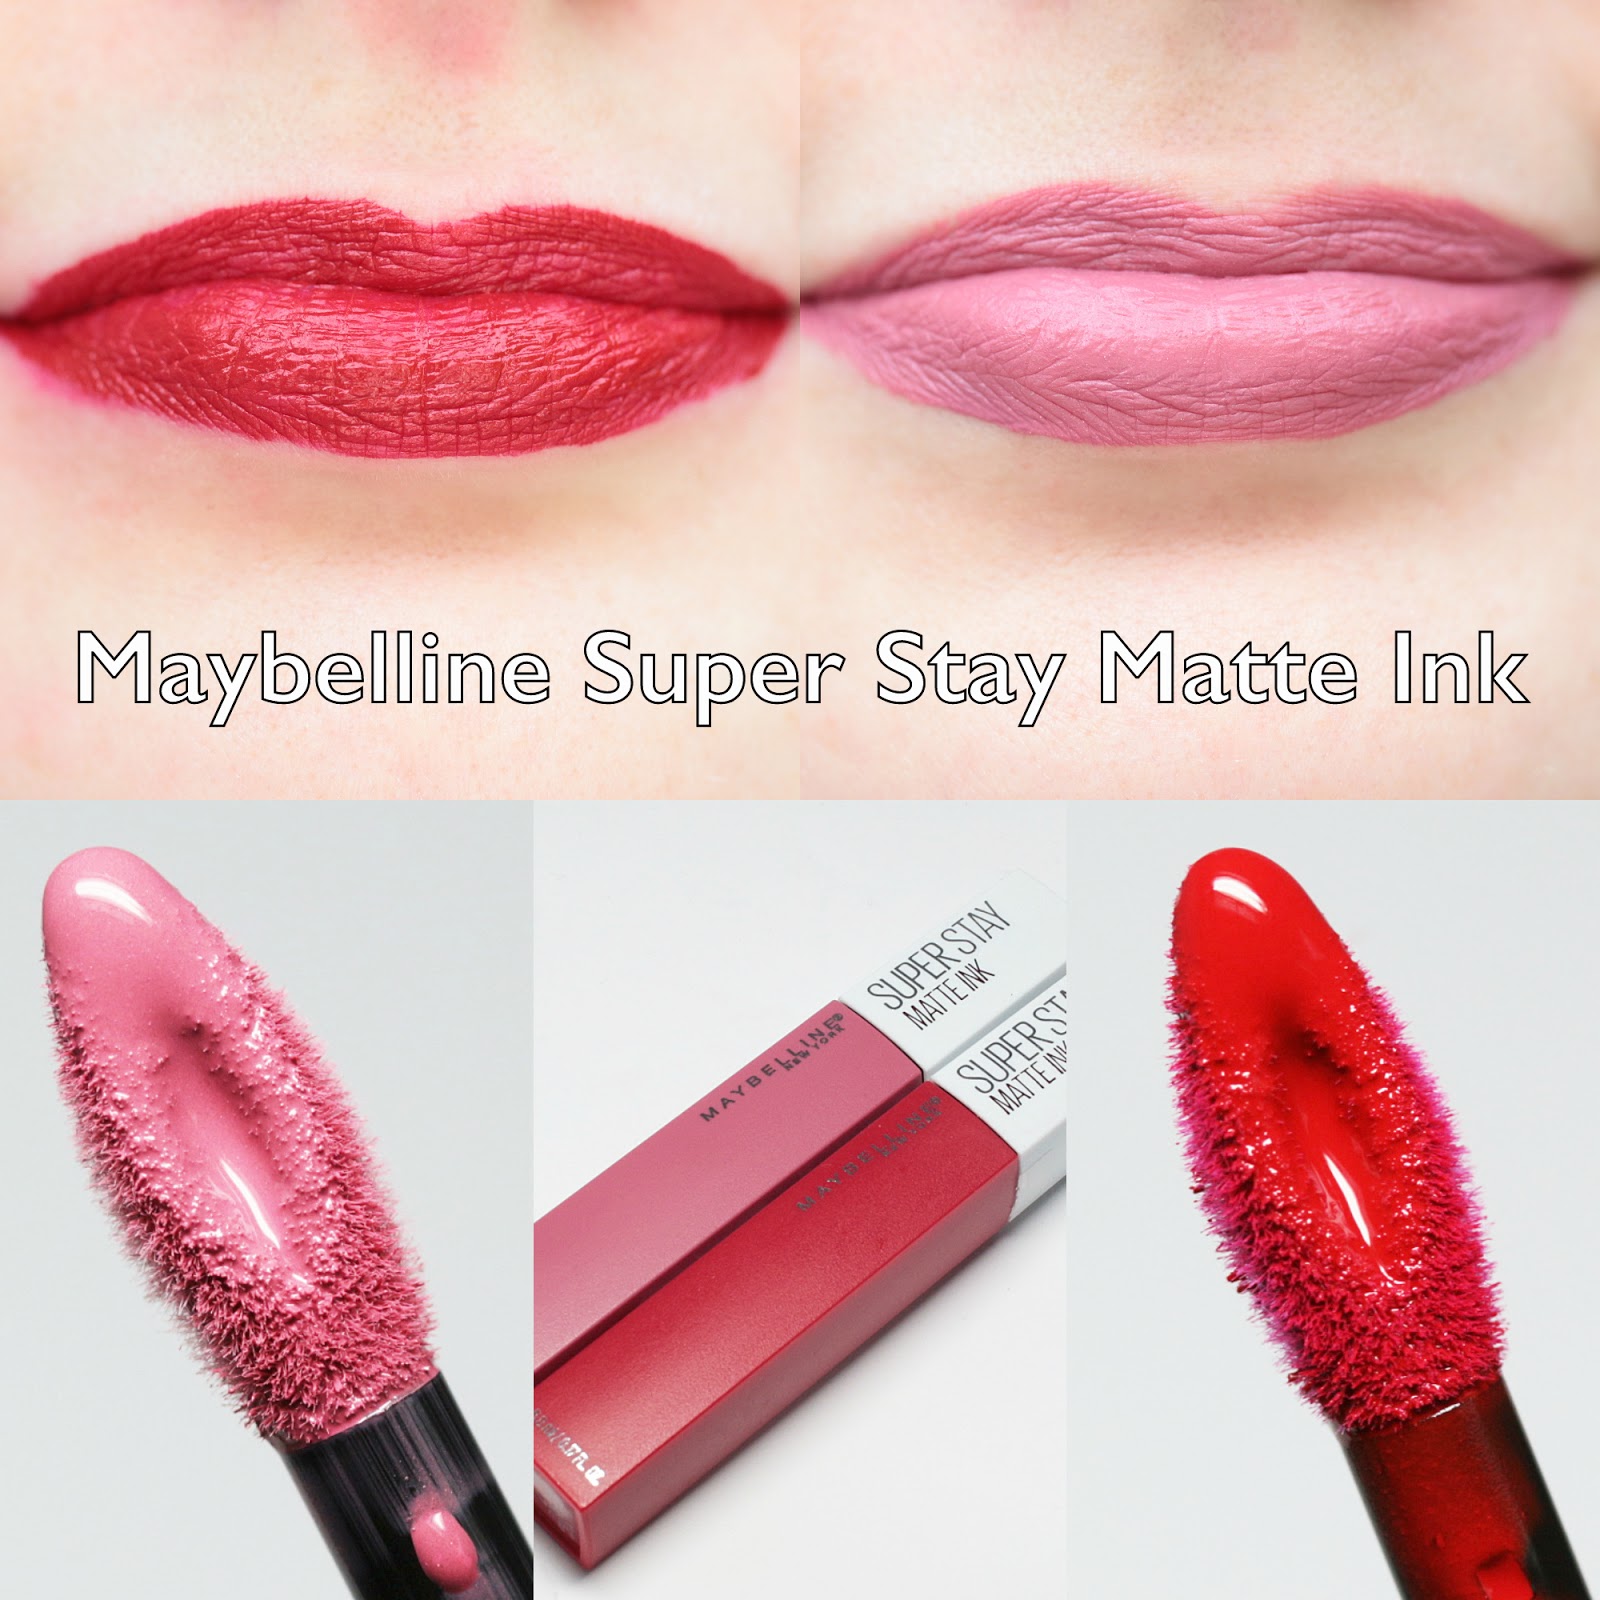 Heb geleerd thermometer beoefenaar The Polished Hippy: Maybelline Super Stay Matte Ink Liquid Lipstick Swatches  and Review